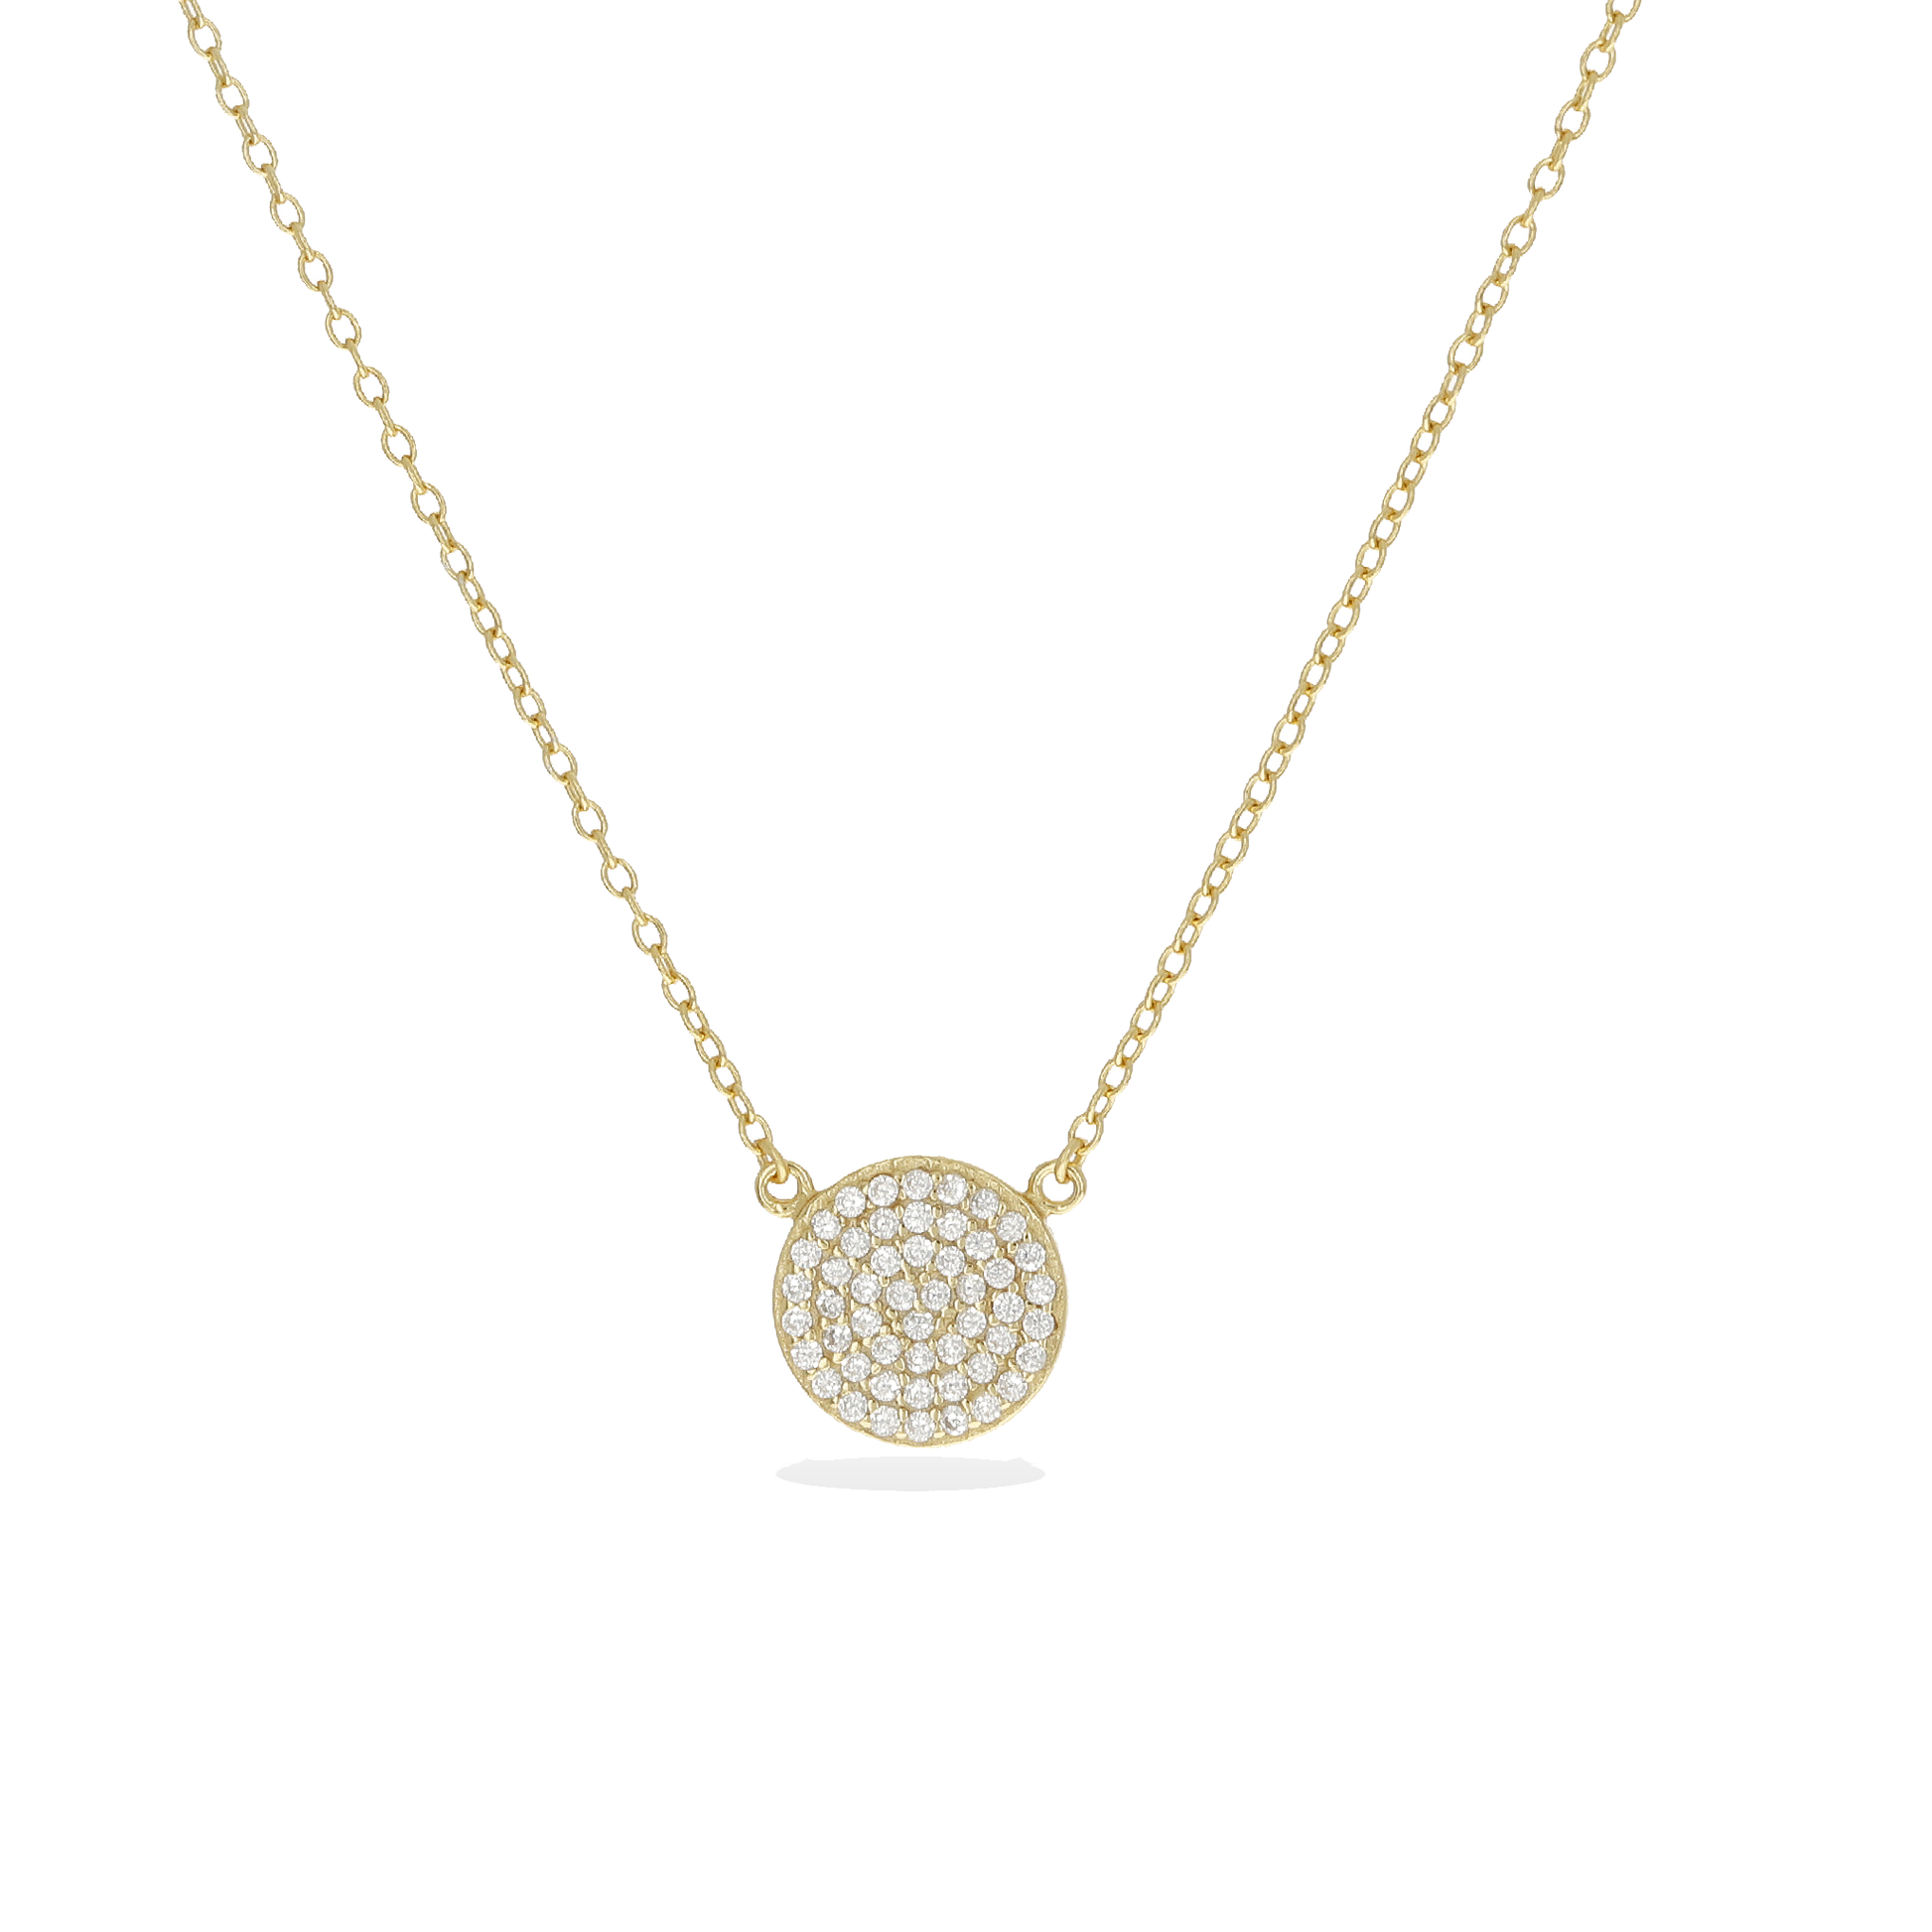 Pave' Cubic Zirconia Gold Circle Necklace from Alexandra Marks Jewelry